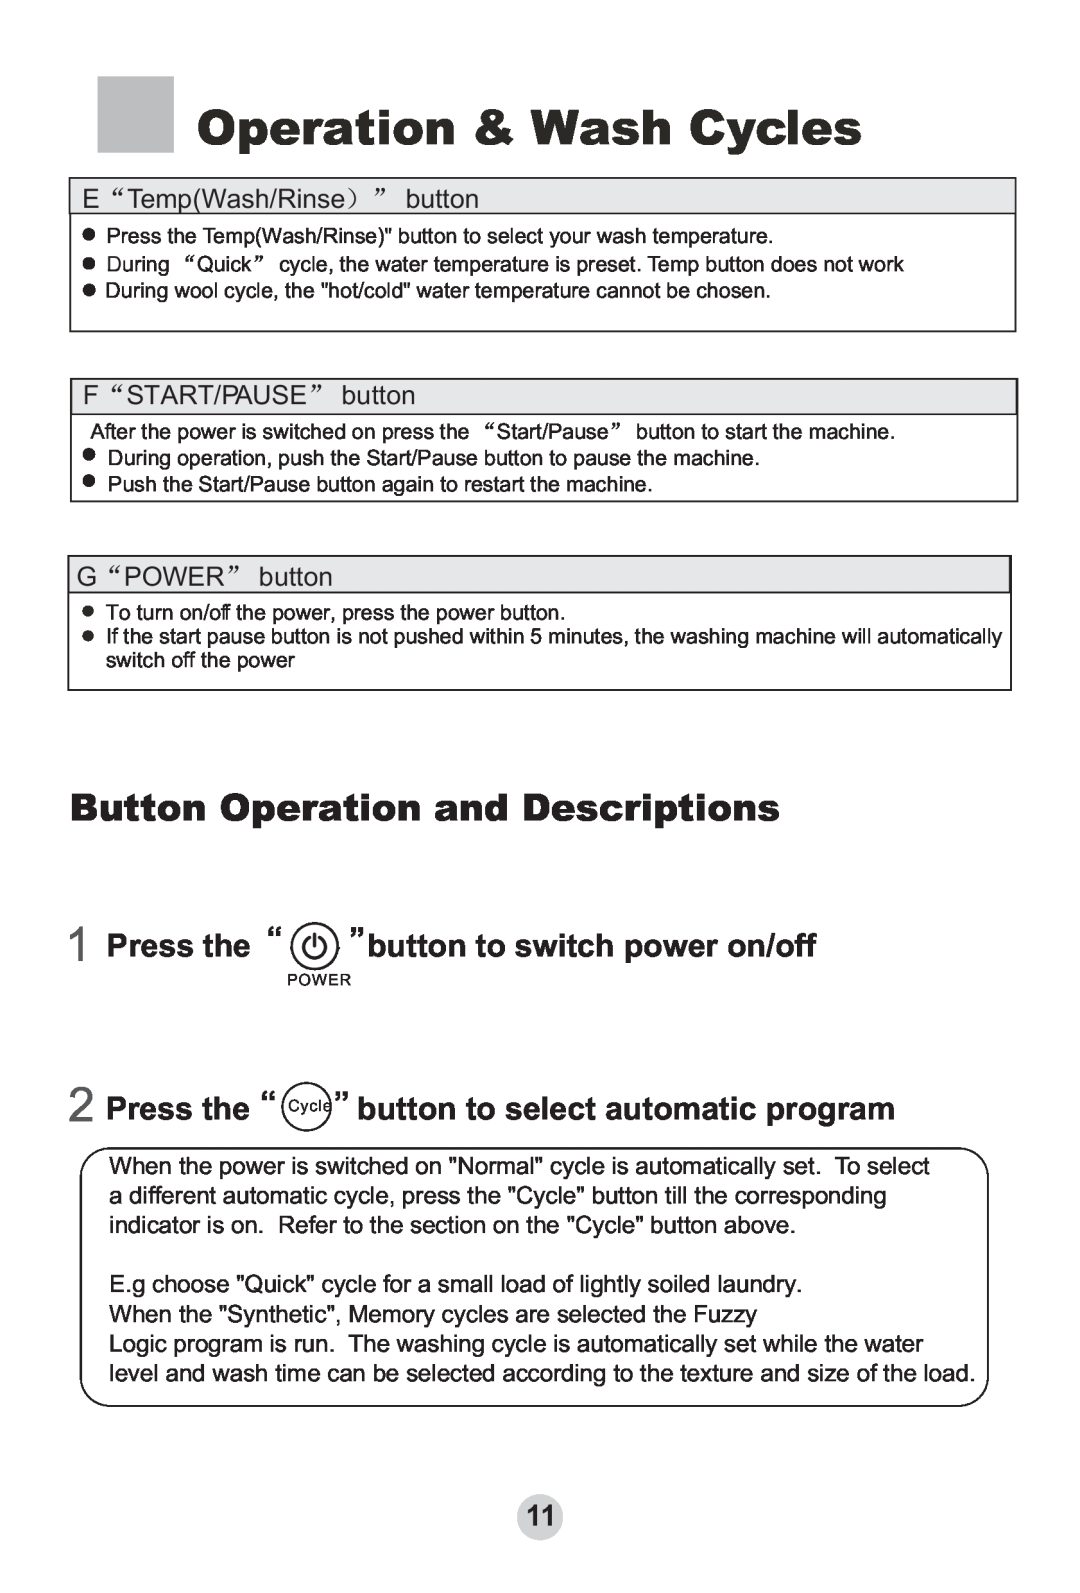 Haier HWMP65-918 Button Operation and Descriptions, Press the, button to switch power on/off, Operation & Wash Cycles 